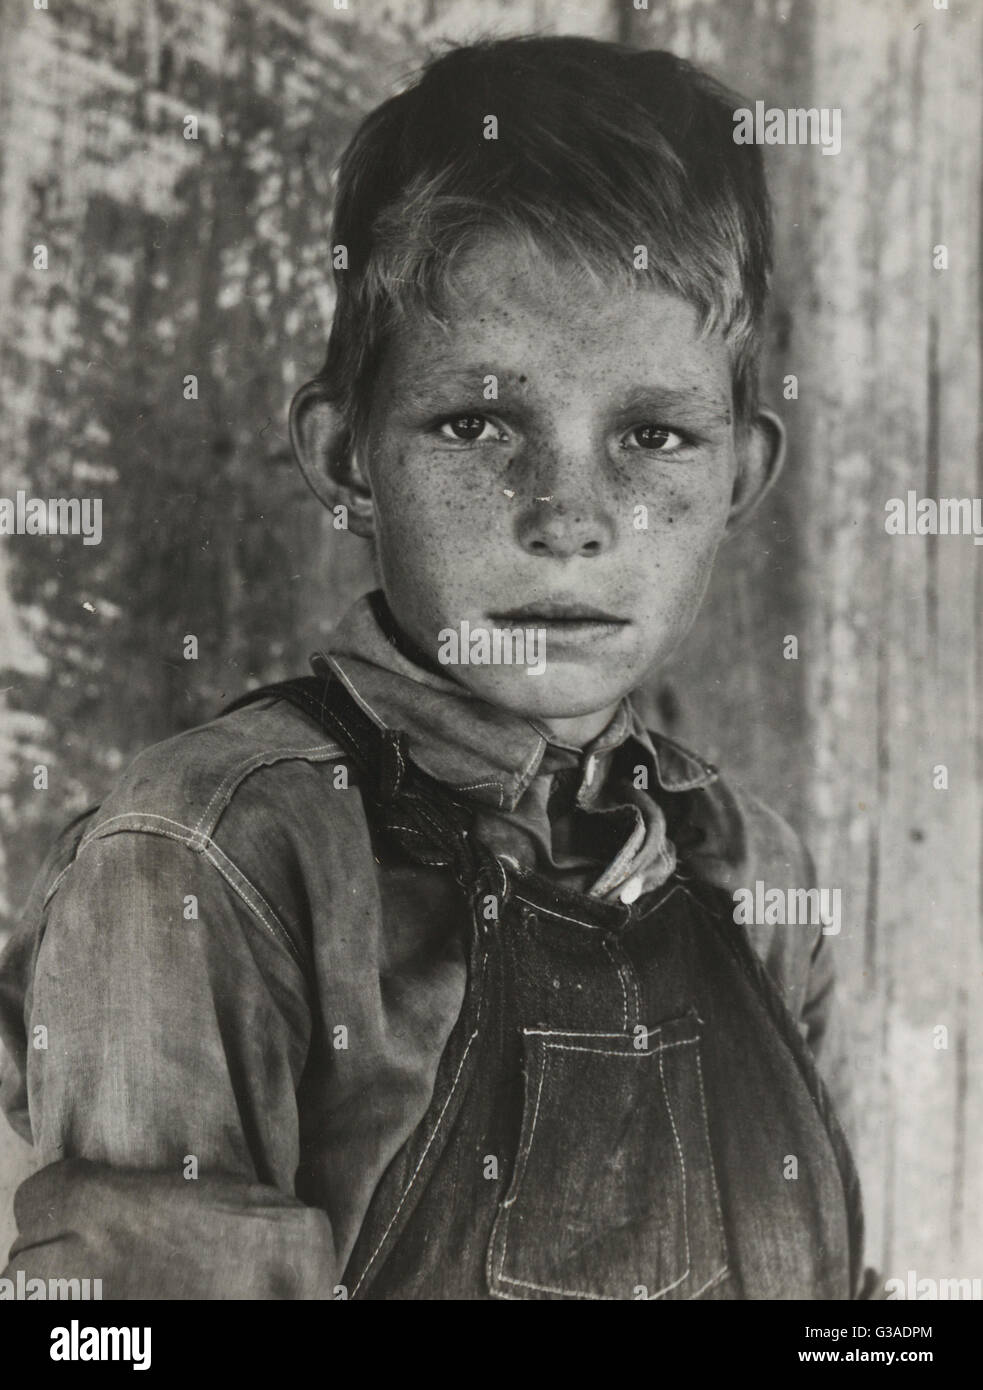 Twelve year old son of a cotton sharecropper near Cleveland, Mississippi. Date 1937 June. Stock Photo